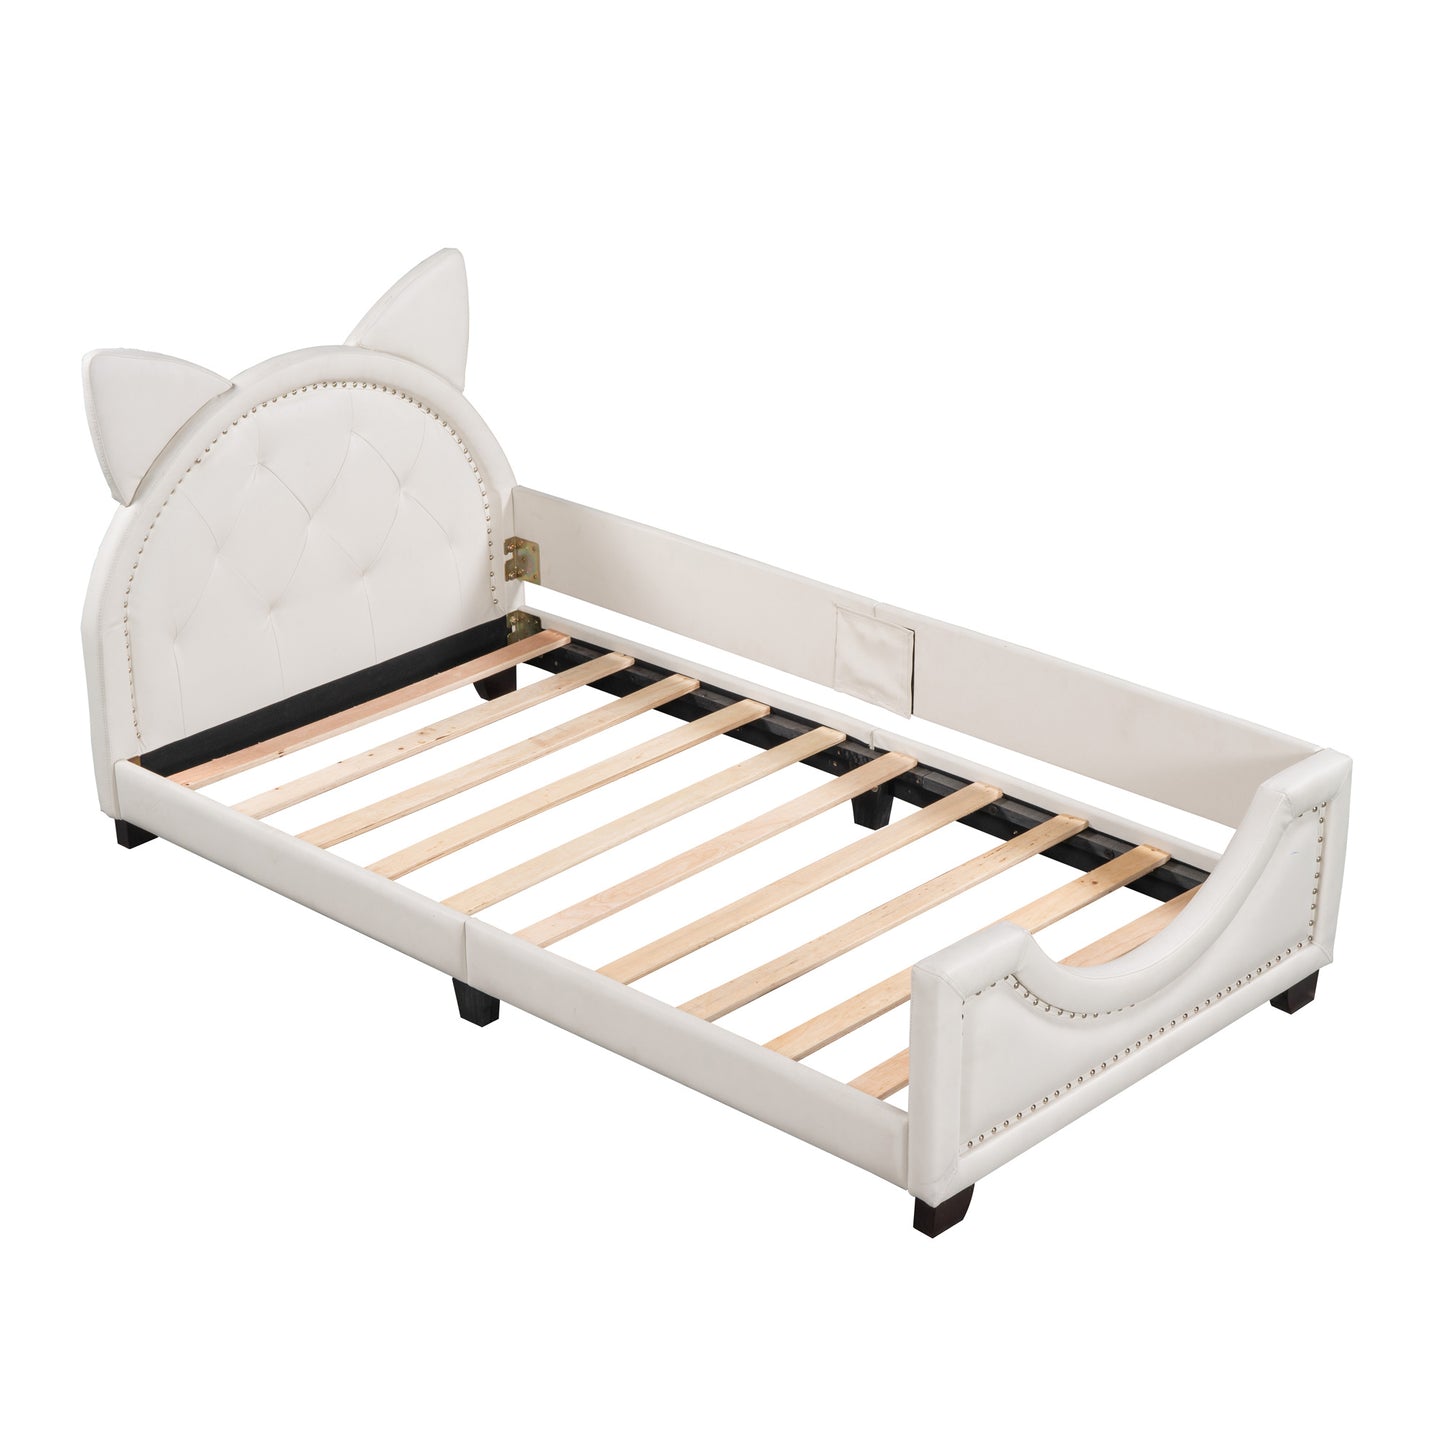 upholstered bed with carton ears shaped headboard, white